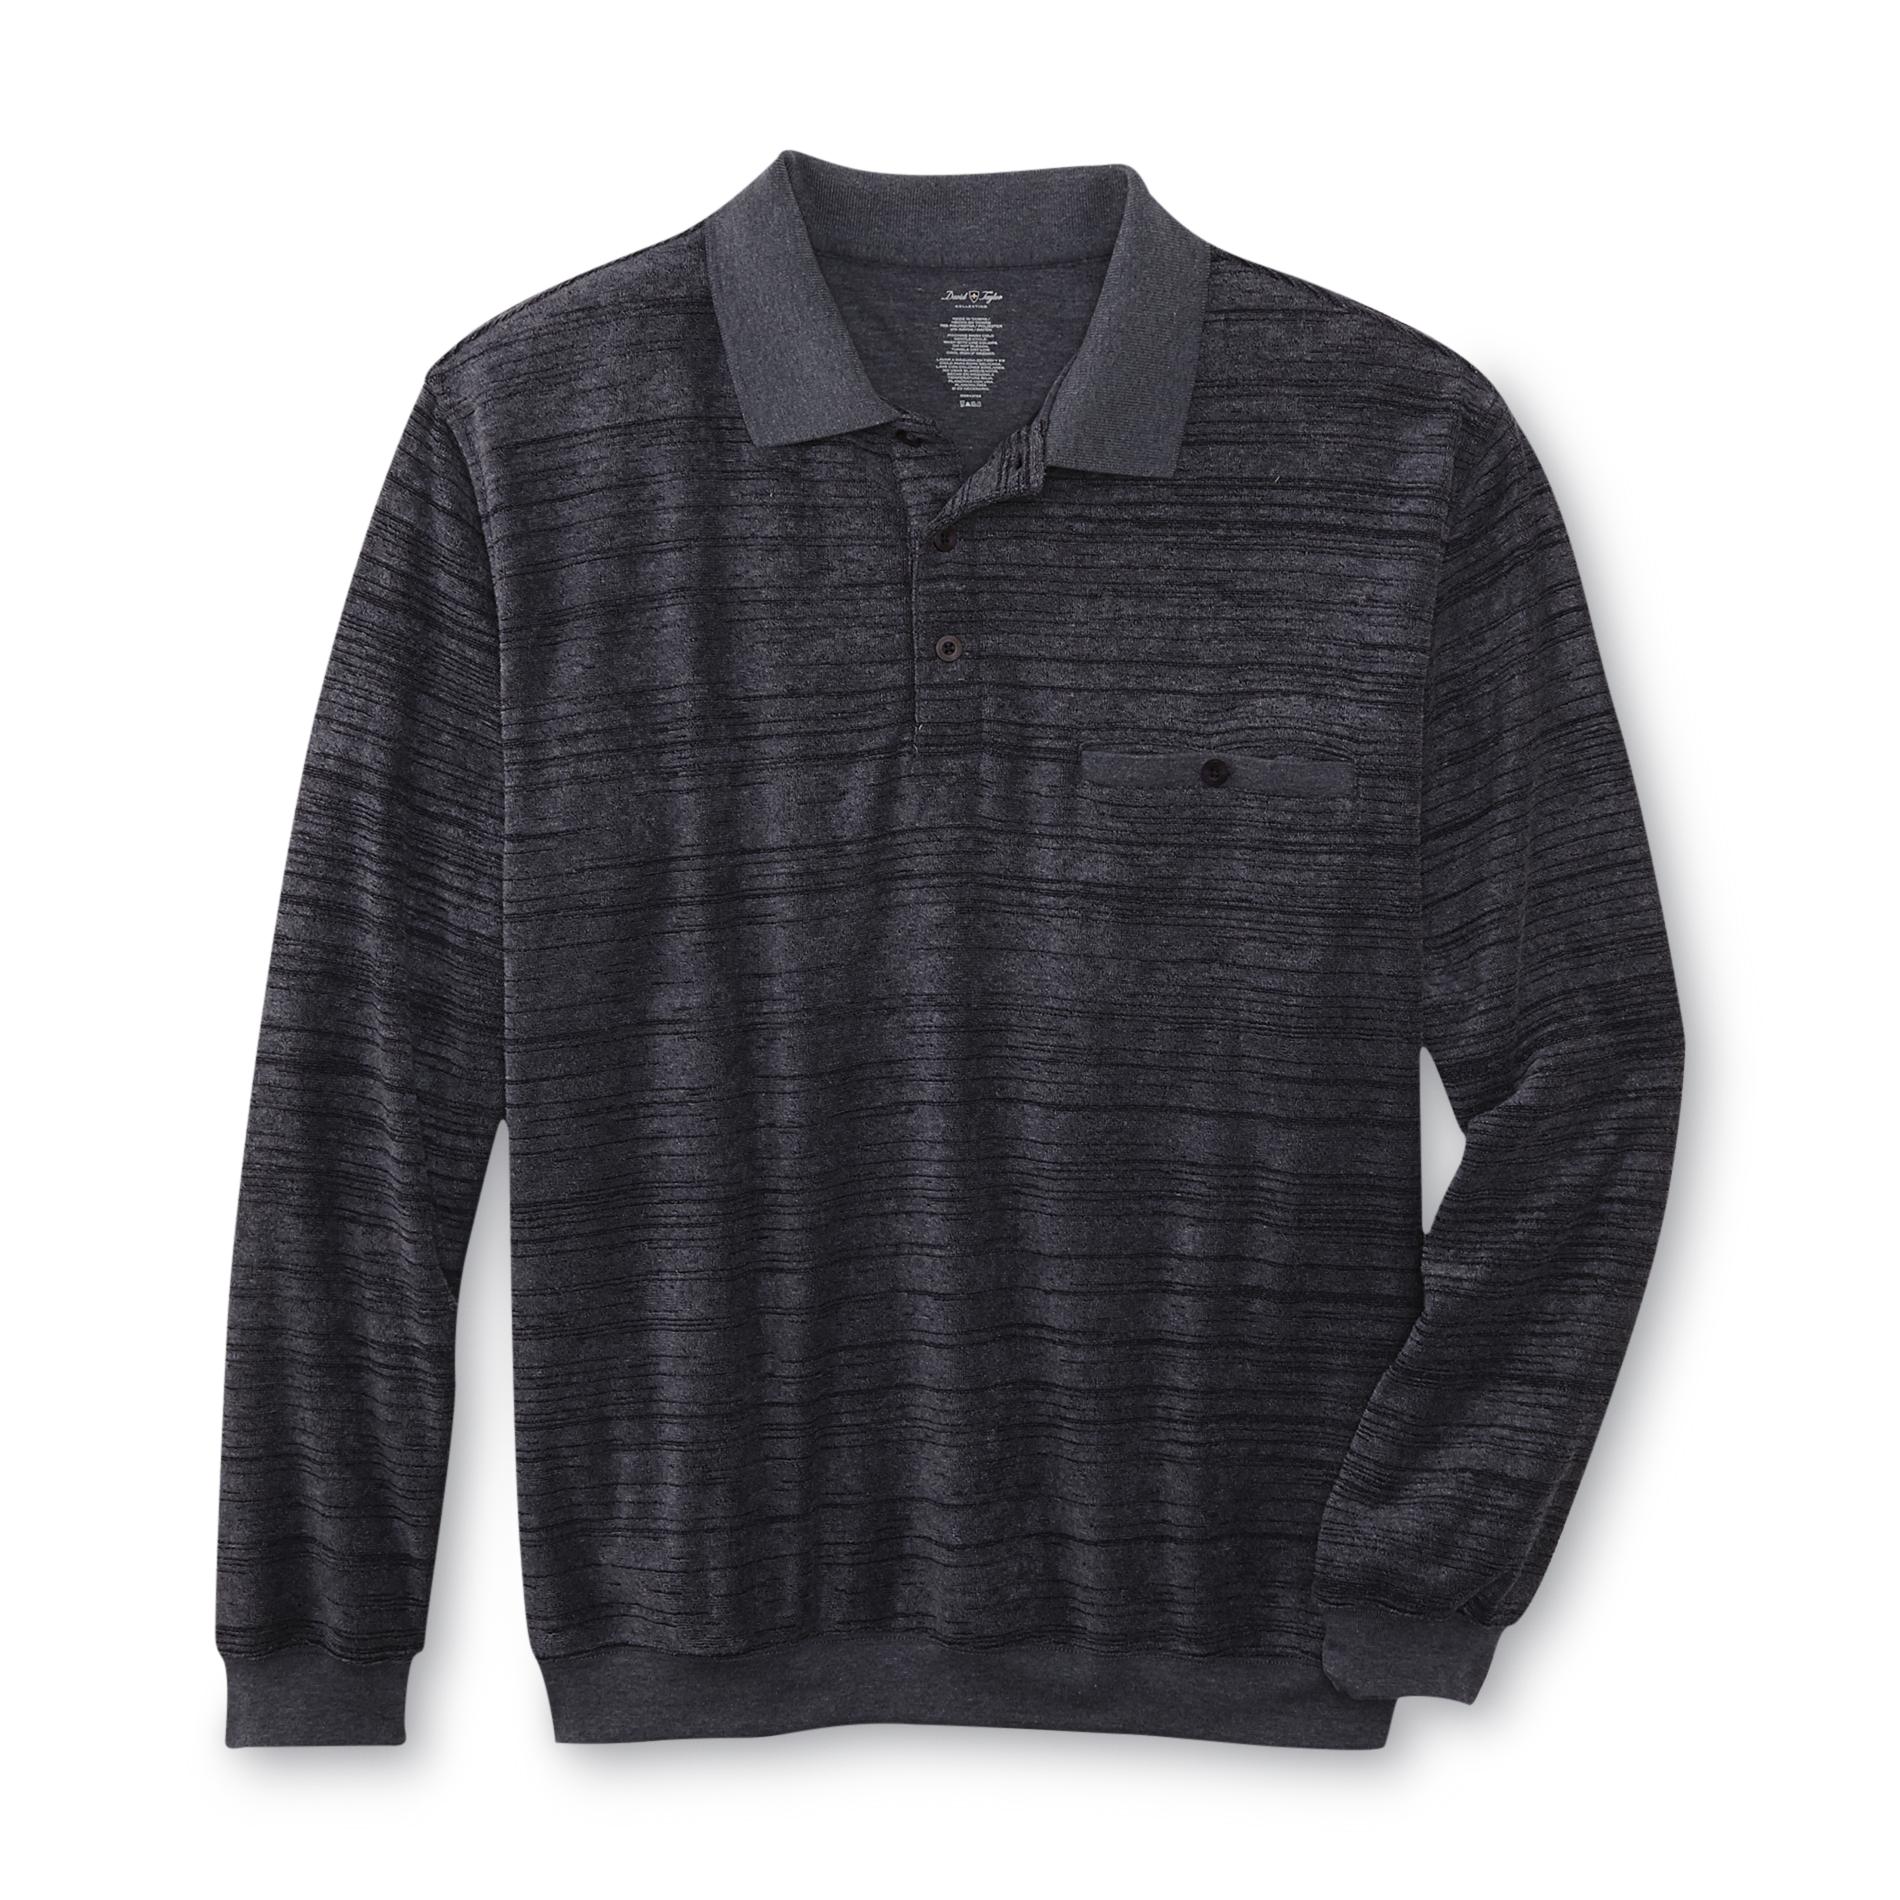 David Taylor Collection Men's Long-Sleeve Polo Shirt - Space Dyed